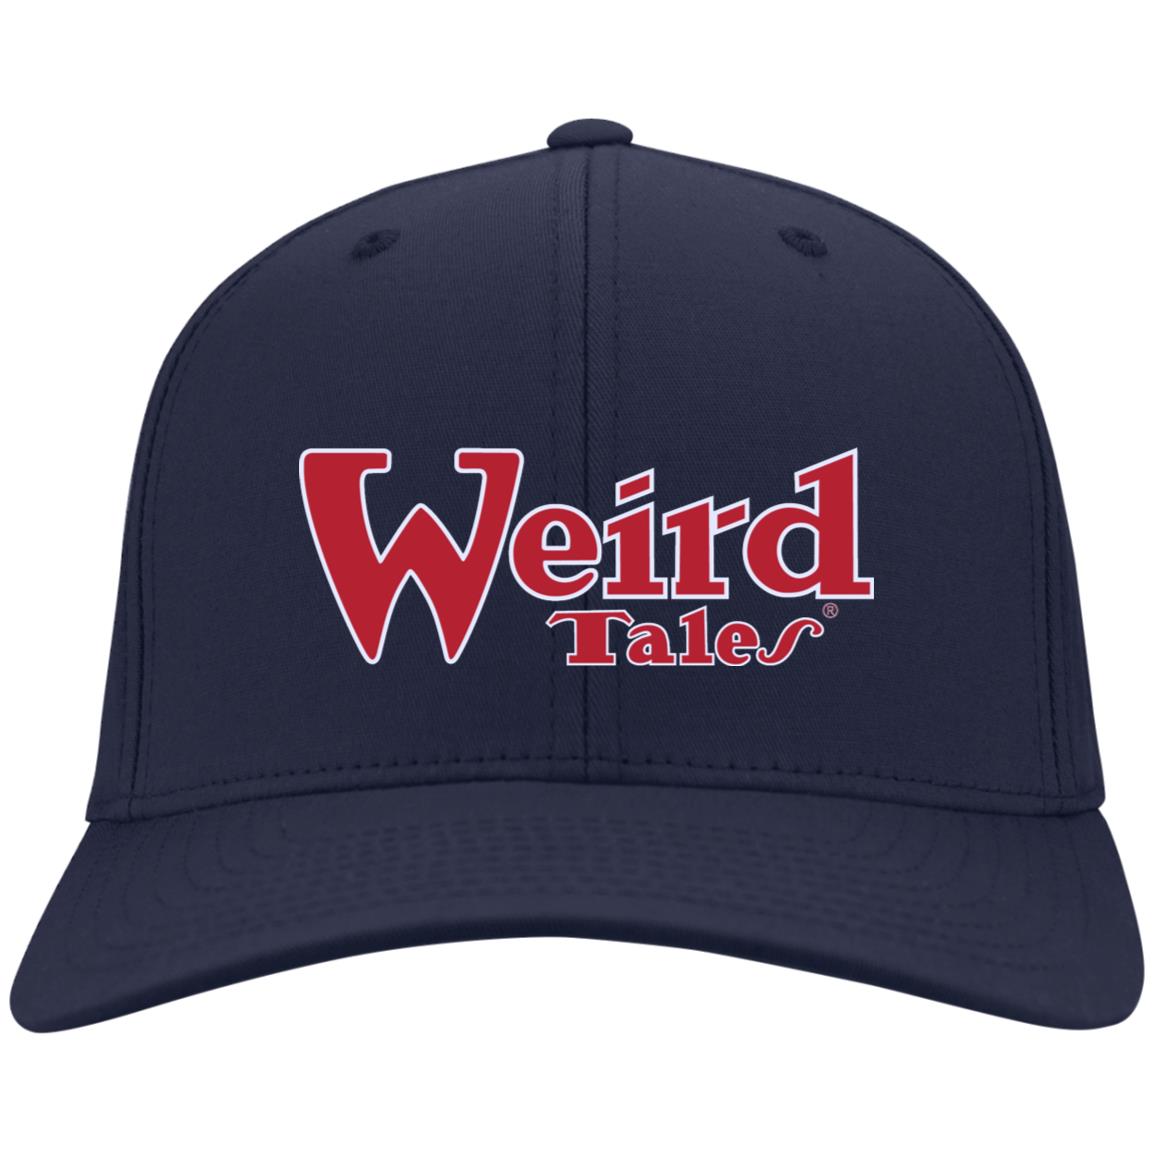 Weird Tales Logo Red-White Embroidered Flex Fit Twill Baseball Cap